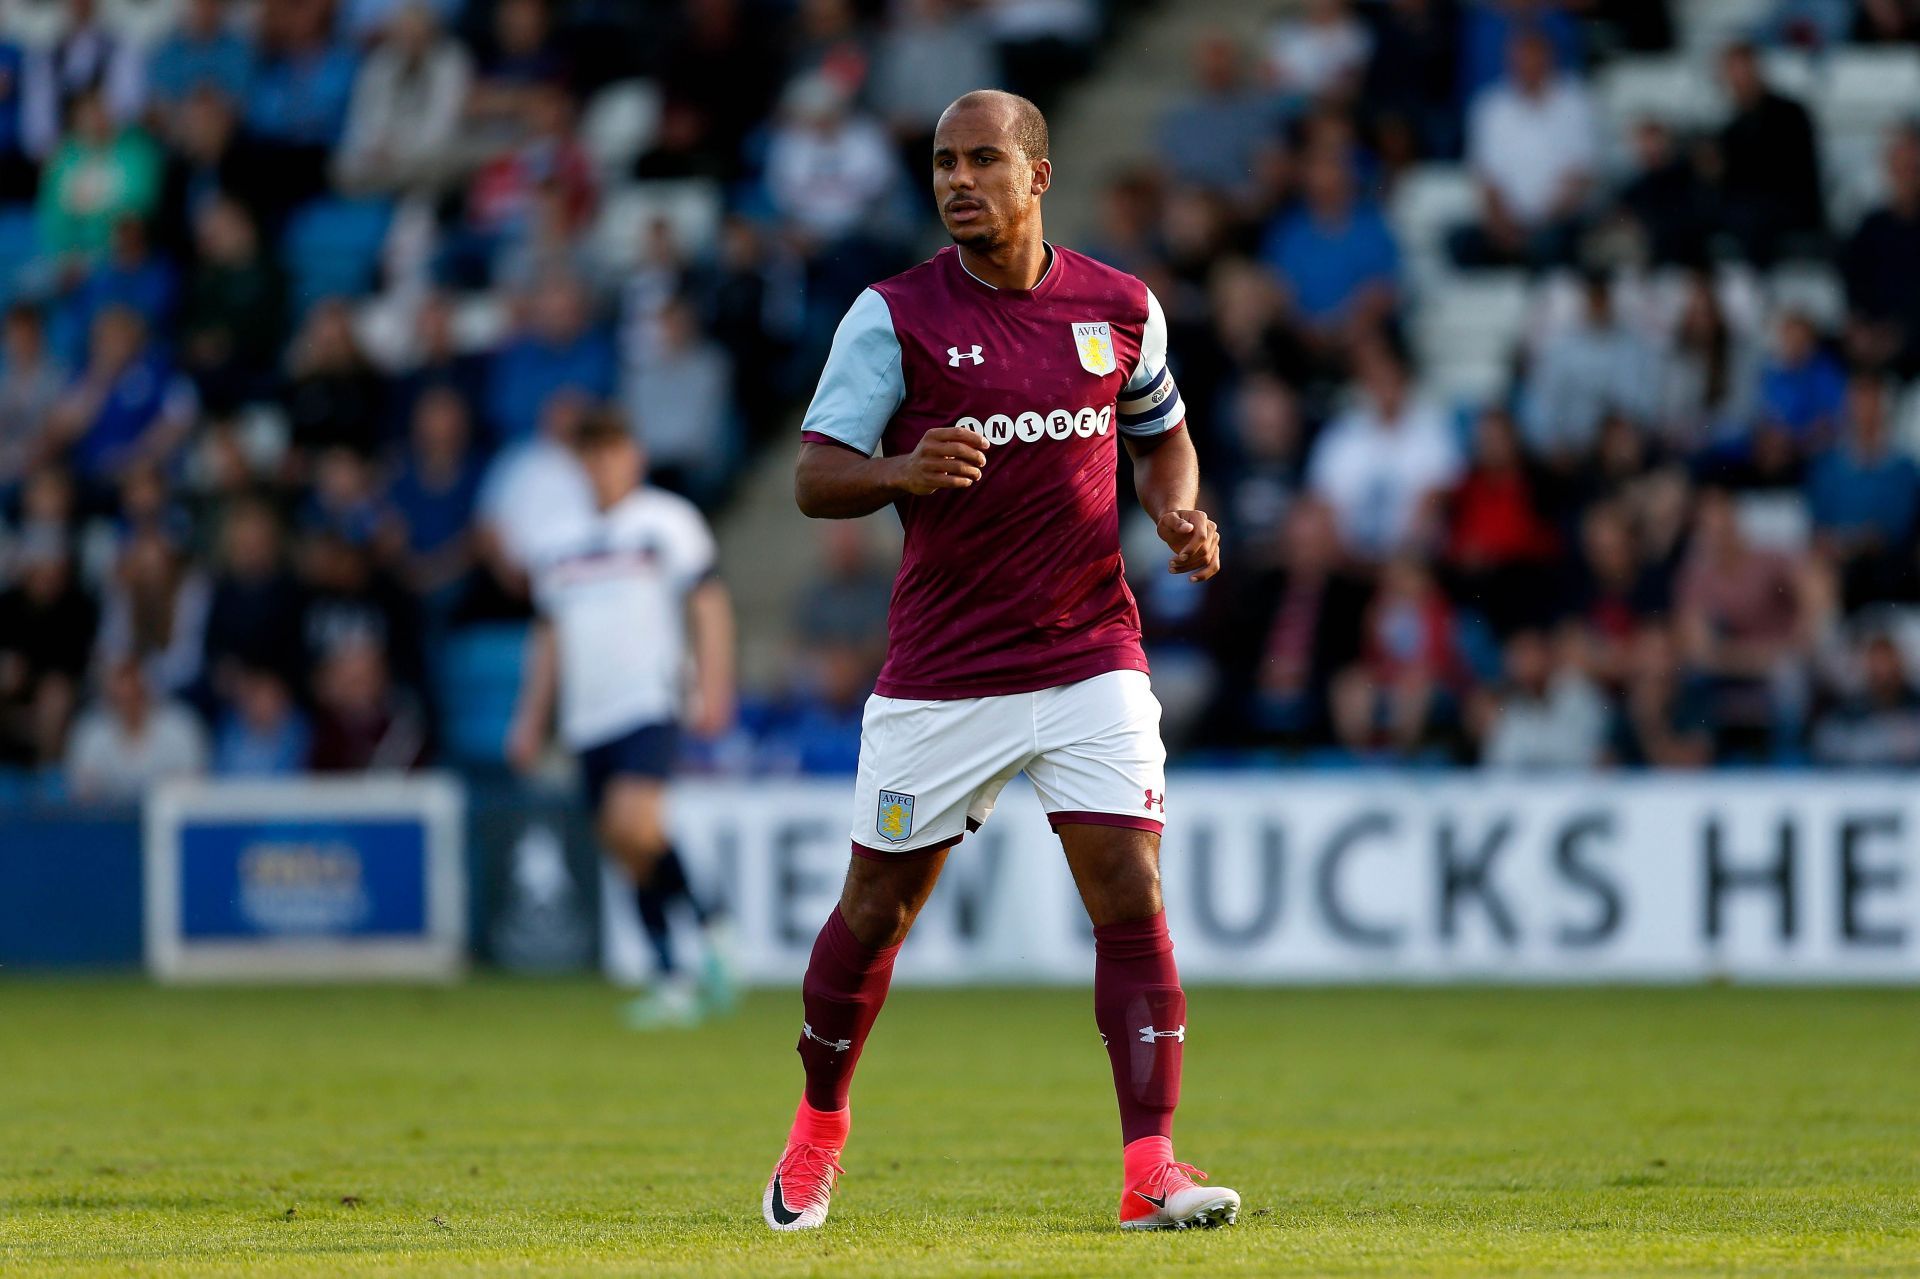 Gabriel Agbonlahor is the top scorer in the EPL for Aston Villa